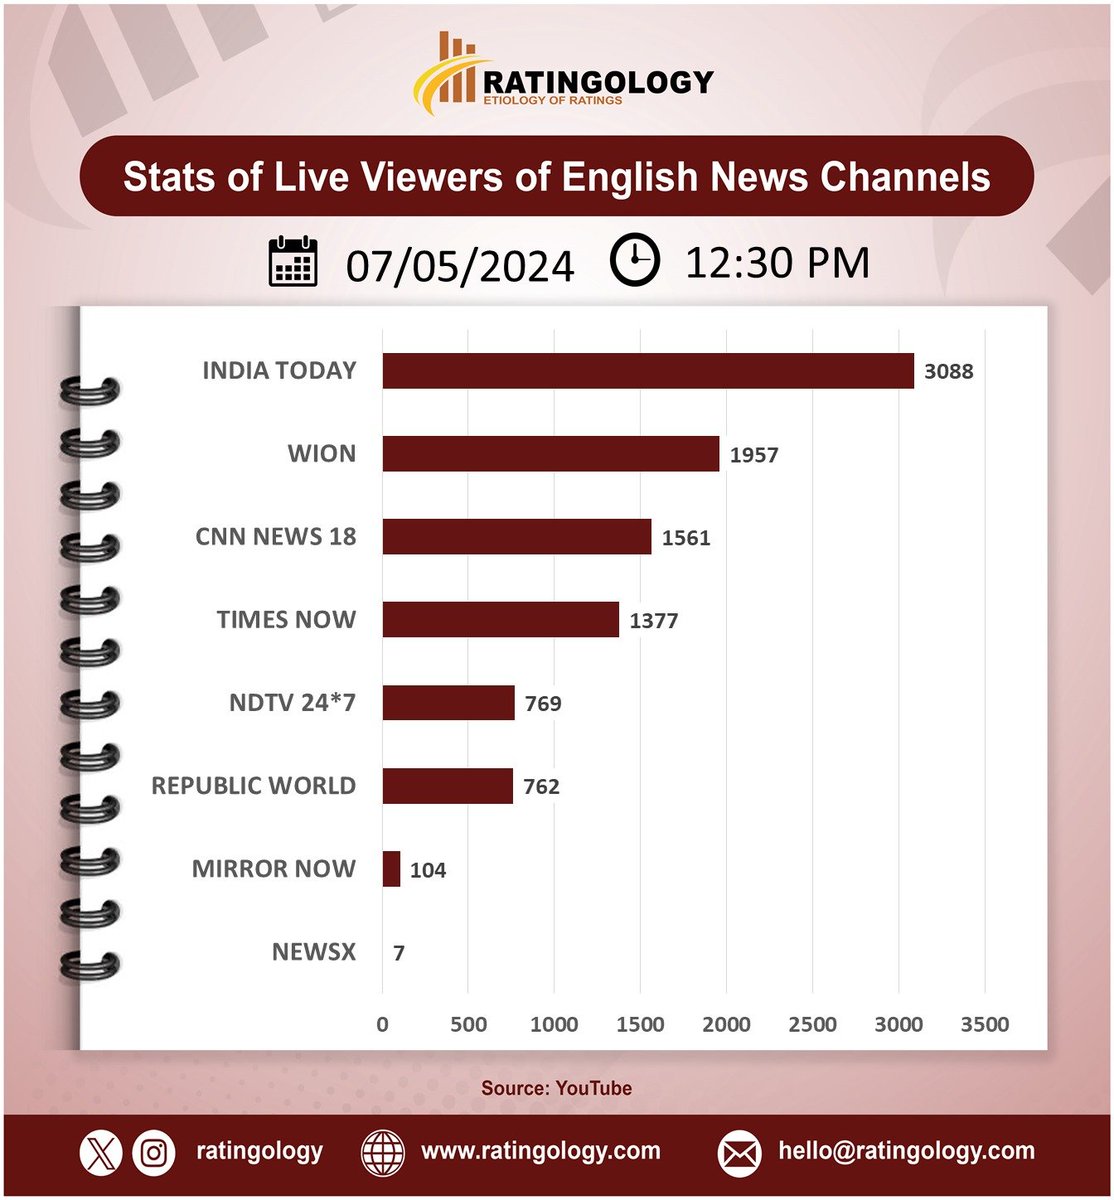 𝐒𝐭𝐚𝐭𝐬 𝐨𝐟 𝐥𝐢𝐯𝐞 𝐯𝐢𝐞𝐰𝐞𝐫𝐬 𝐨𝐧 #Youtube of #EnglishMedia #channelsat 12:30pm, Date: 07/May/2024 #Ratingology #Mediastats #RatingsKaBaap #DataScience #IndiaToday #Wion #RepublicTV #CNNNews18 #TimesNow #NewsX #NDTV24x7 #MirrorNow